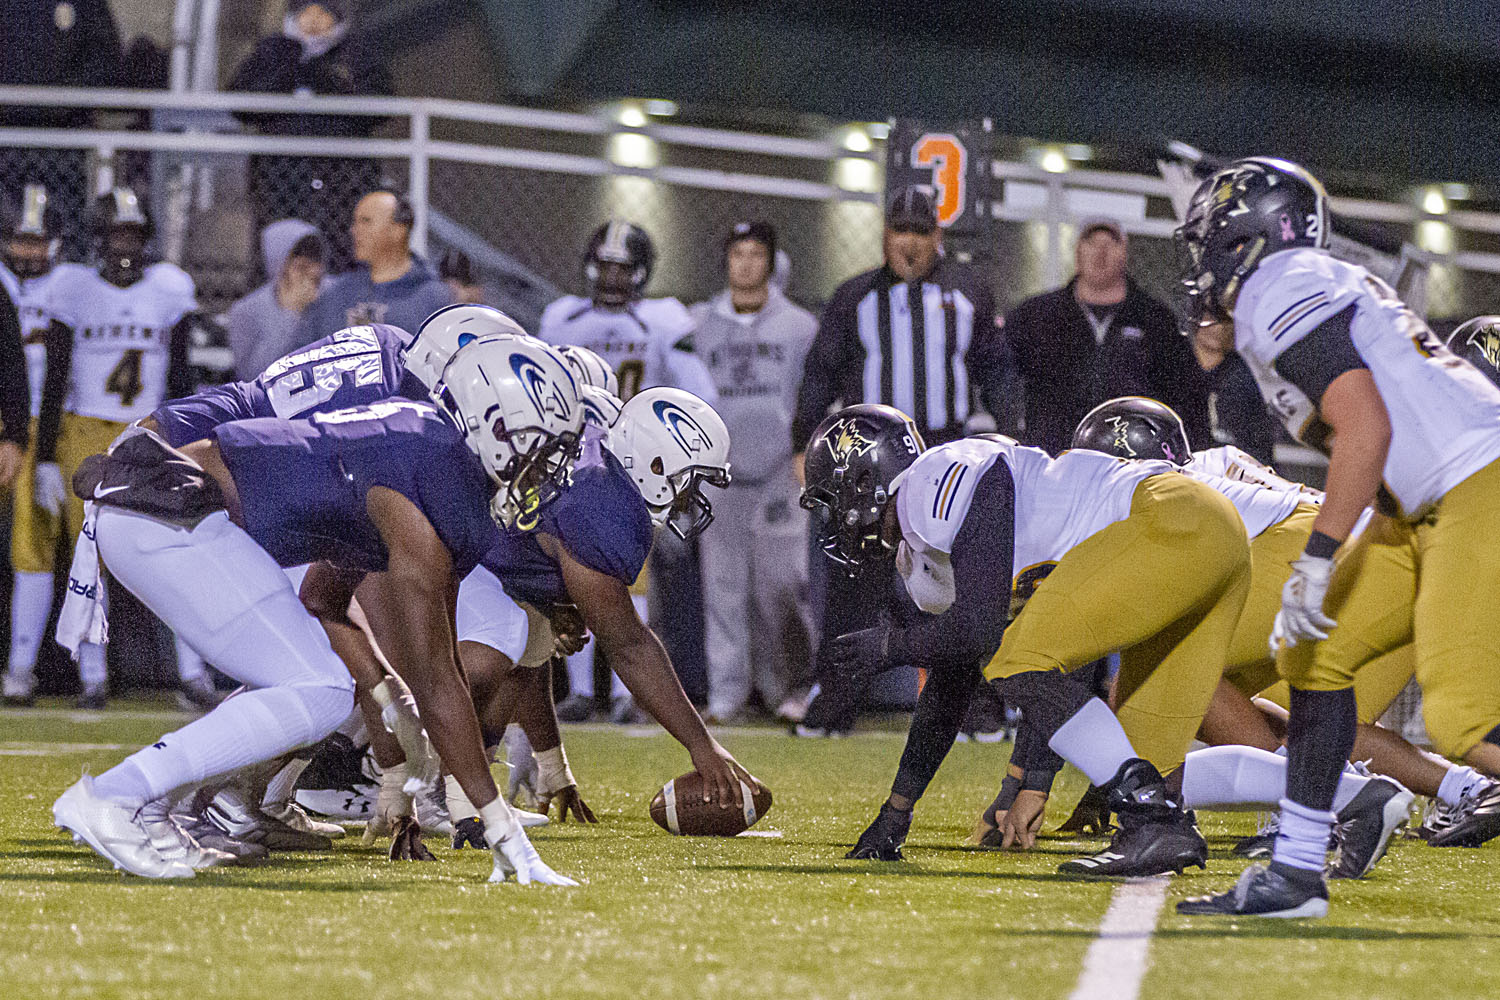 Clay-Chalkville football enters a 2020 season wrapped with a veneer of change